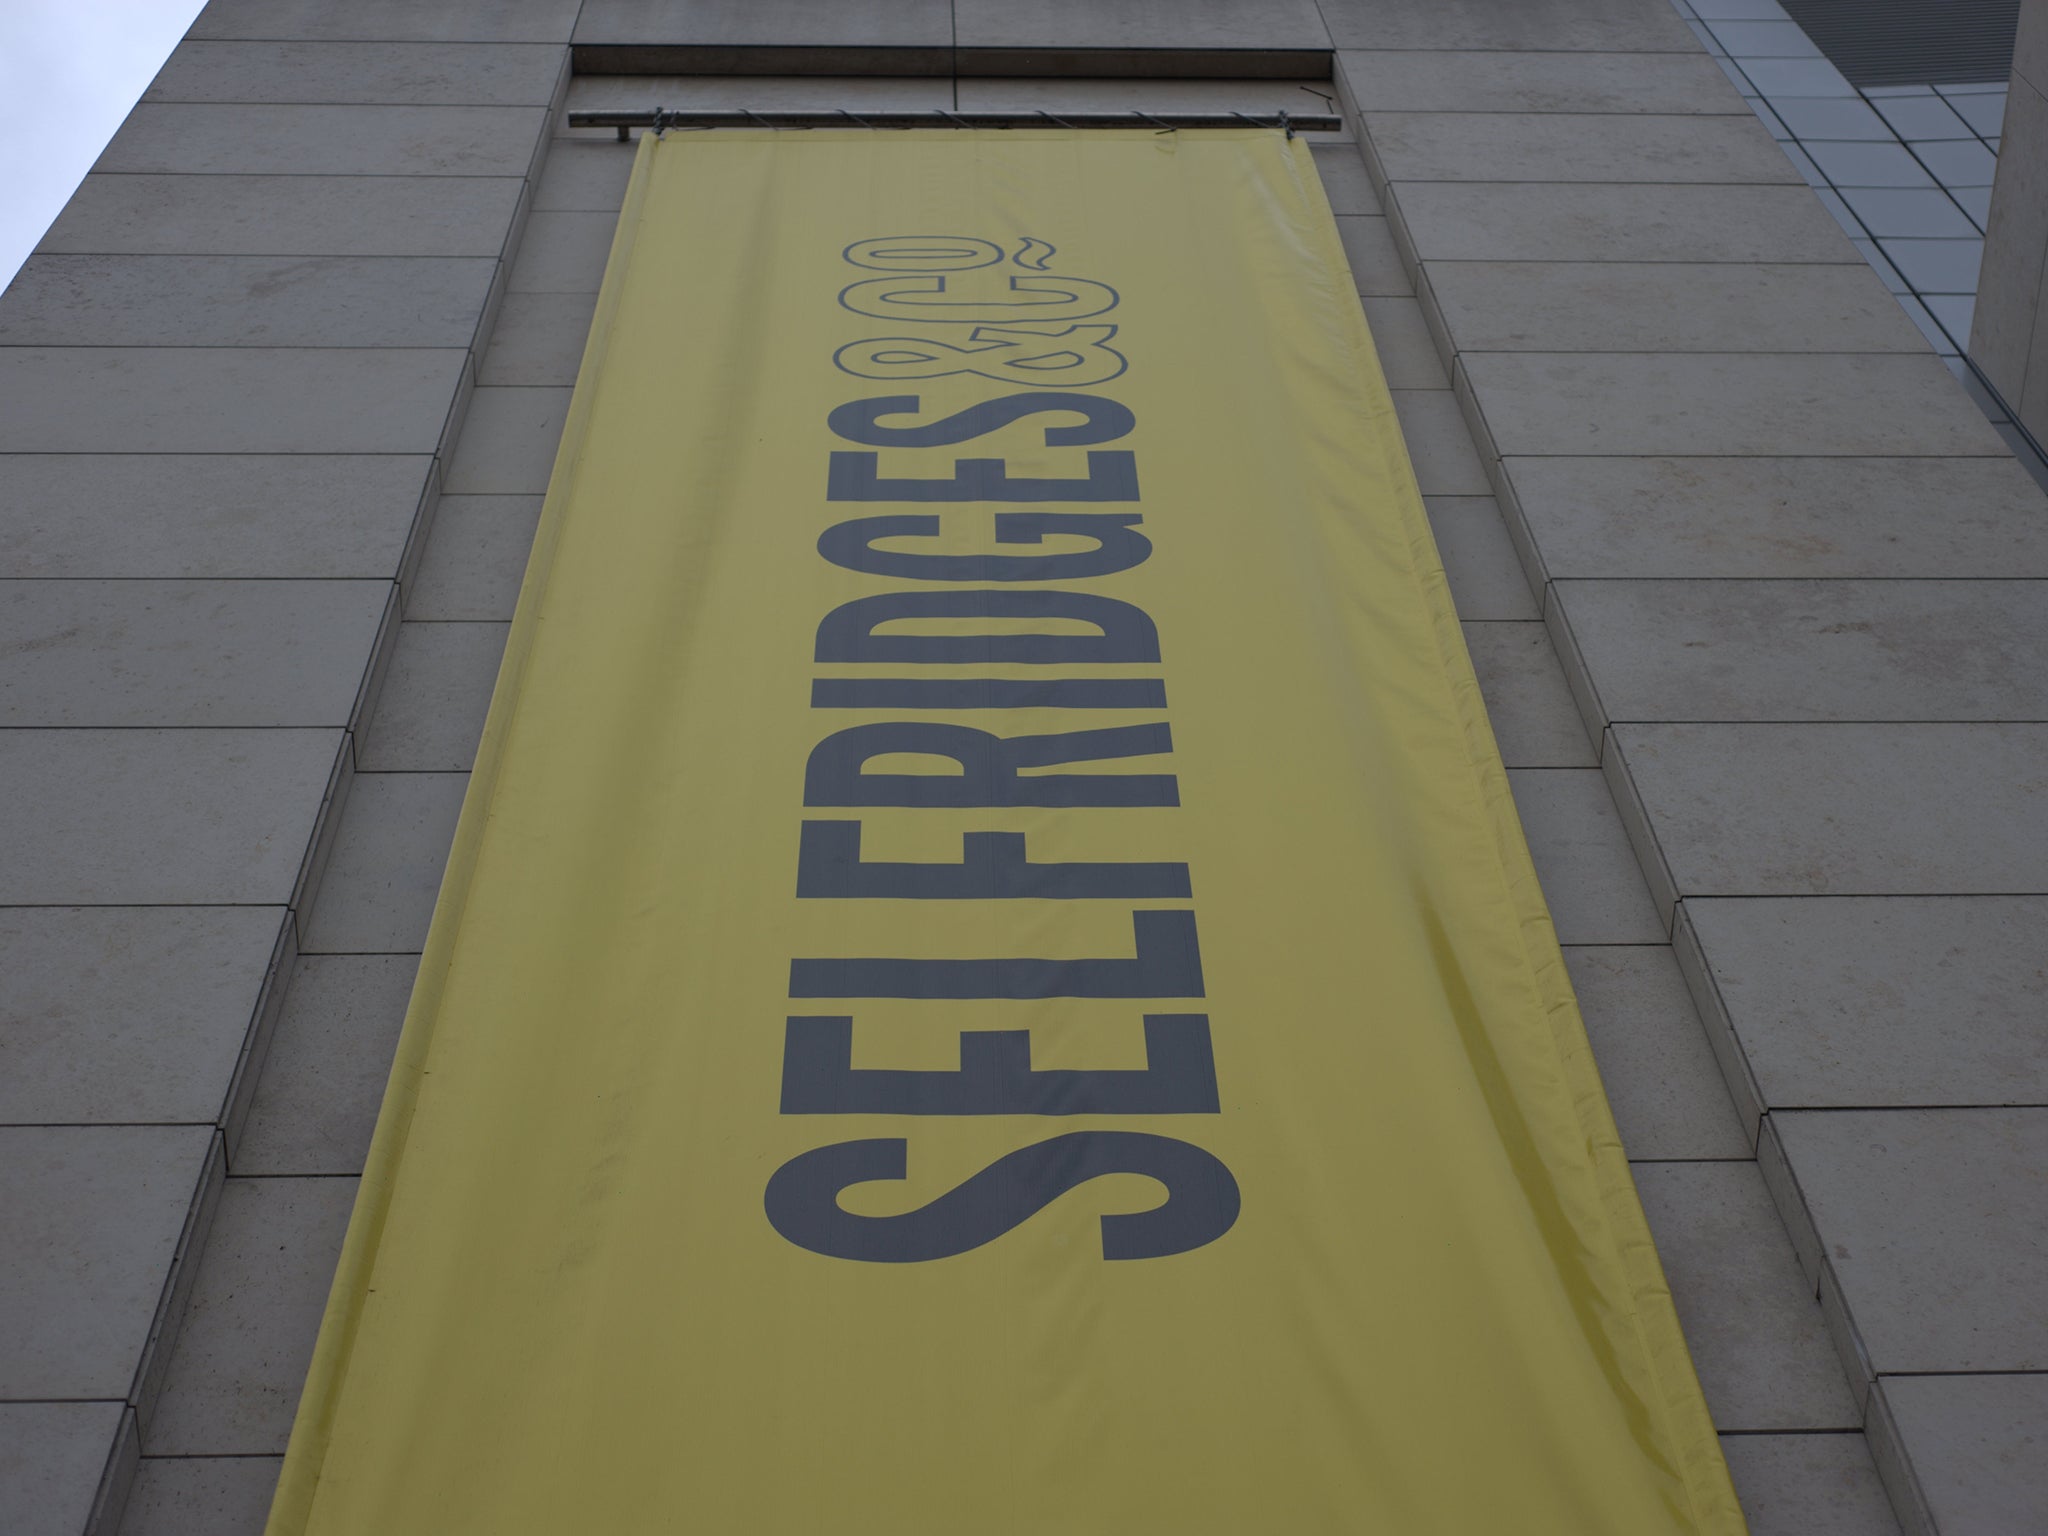 The petition against Selfridges has attracted more than 3,000 signatures